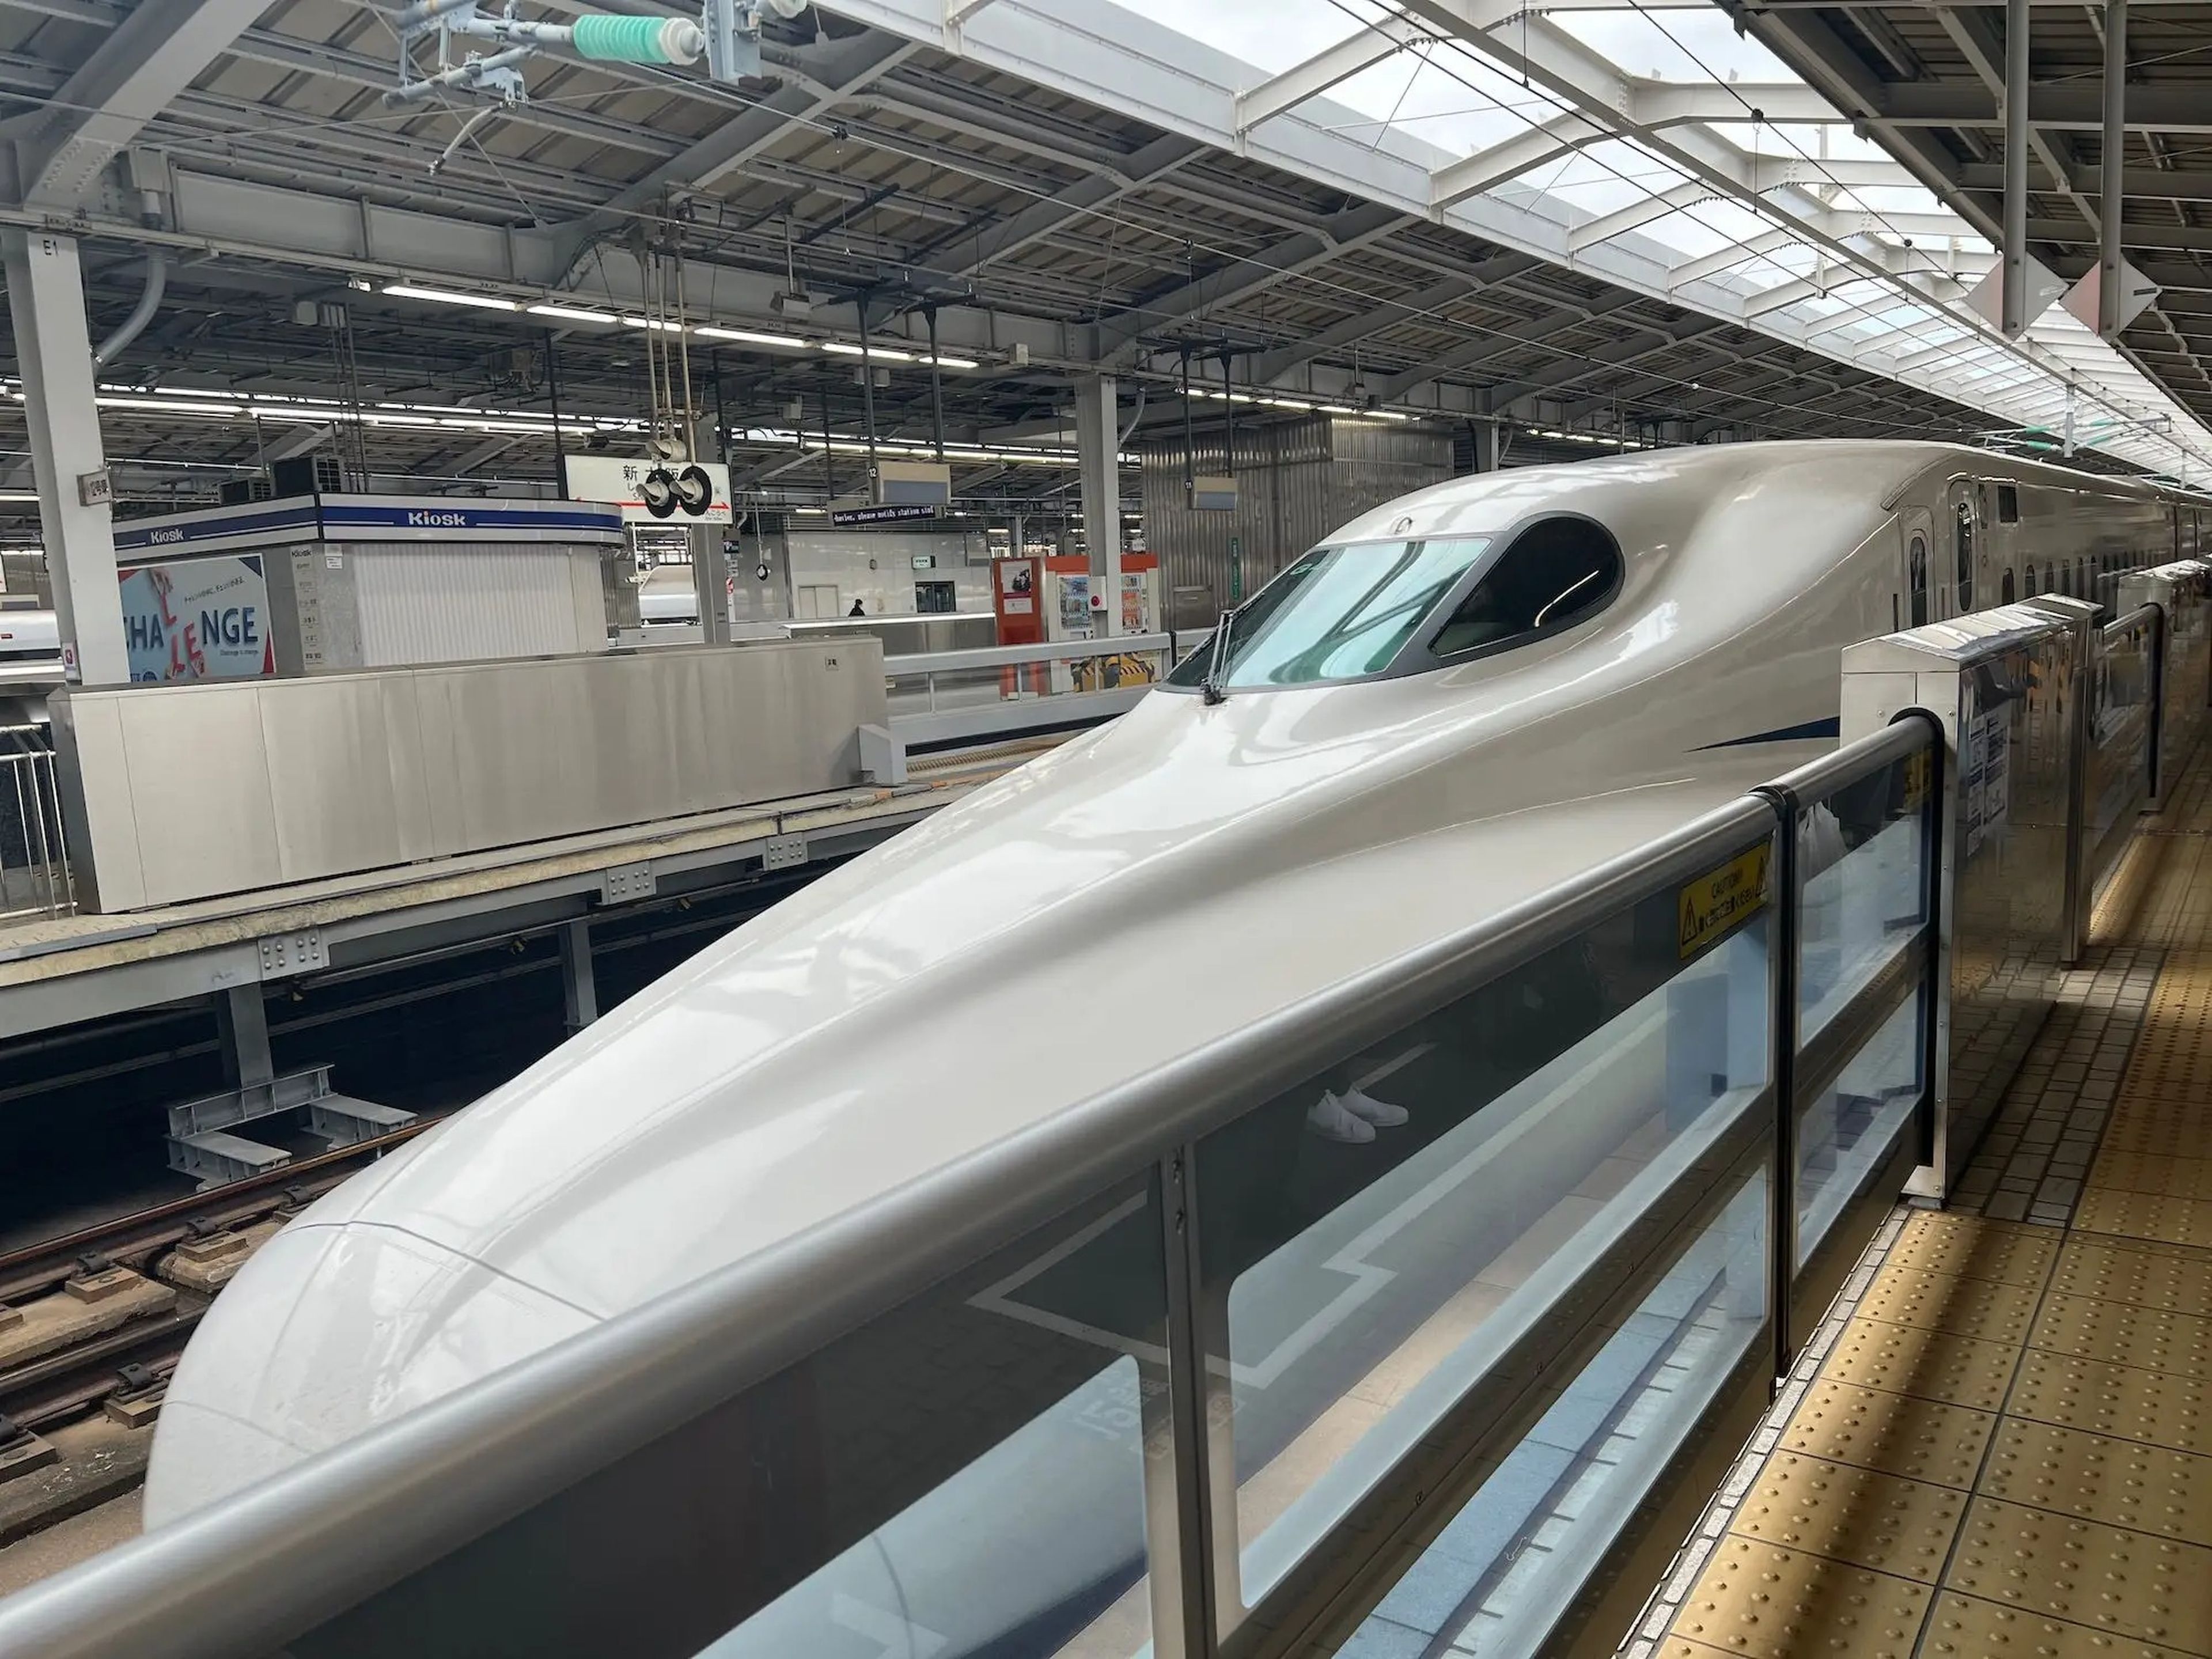 The needle-nose tip of the bullet train at Osaka Station.